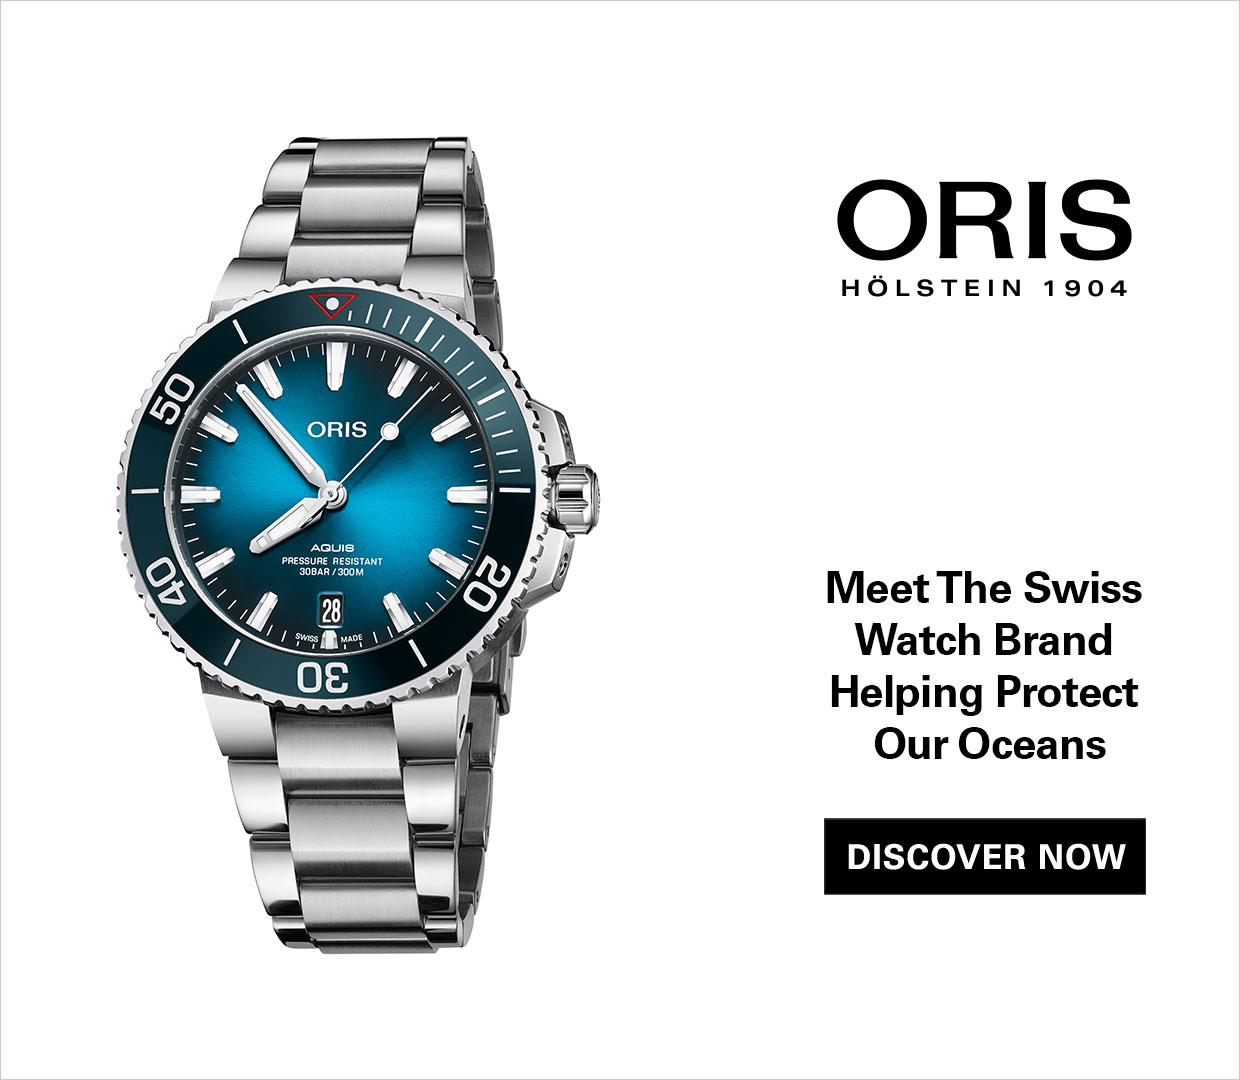 Discover the Oris Aquis Clean Ocean Limited Edition! The Clean Ocean Limited Edition is based on the high-functioning Oris Aquis diver's watch. Each of the 2,000 pieces created carries a unique medal made of recycled plastic inserted into the case back. Shop now!